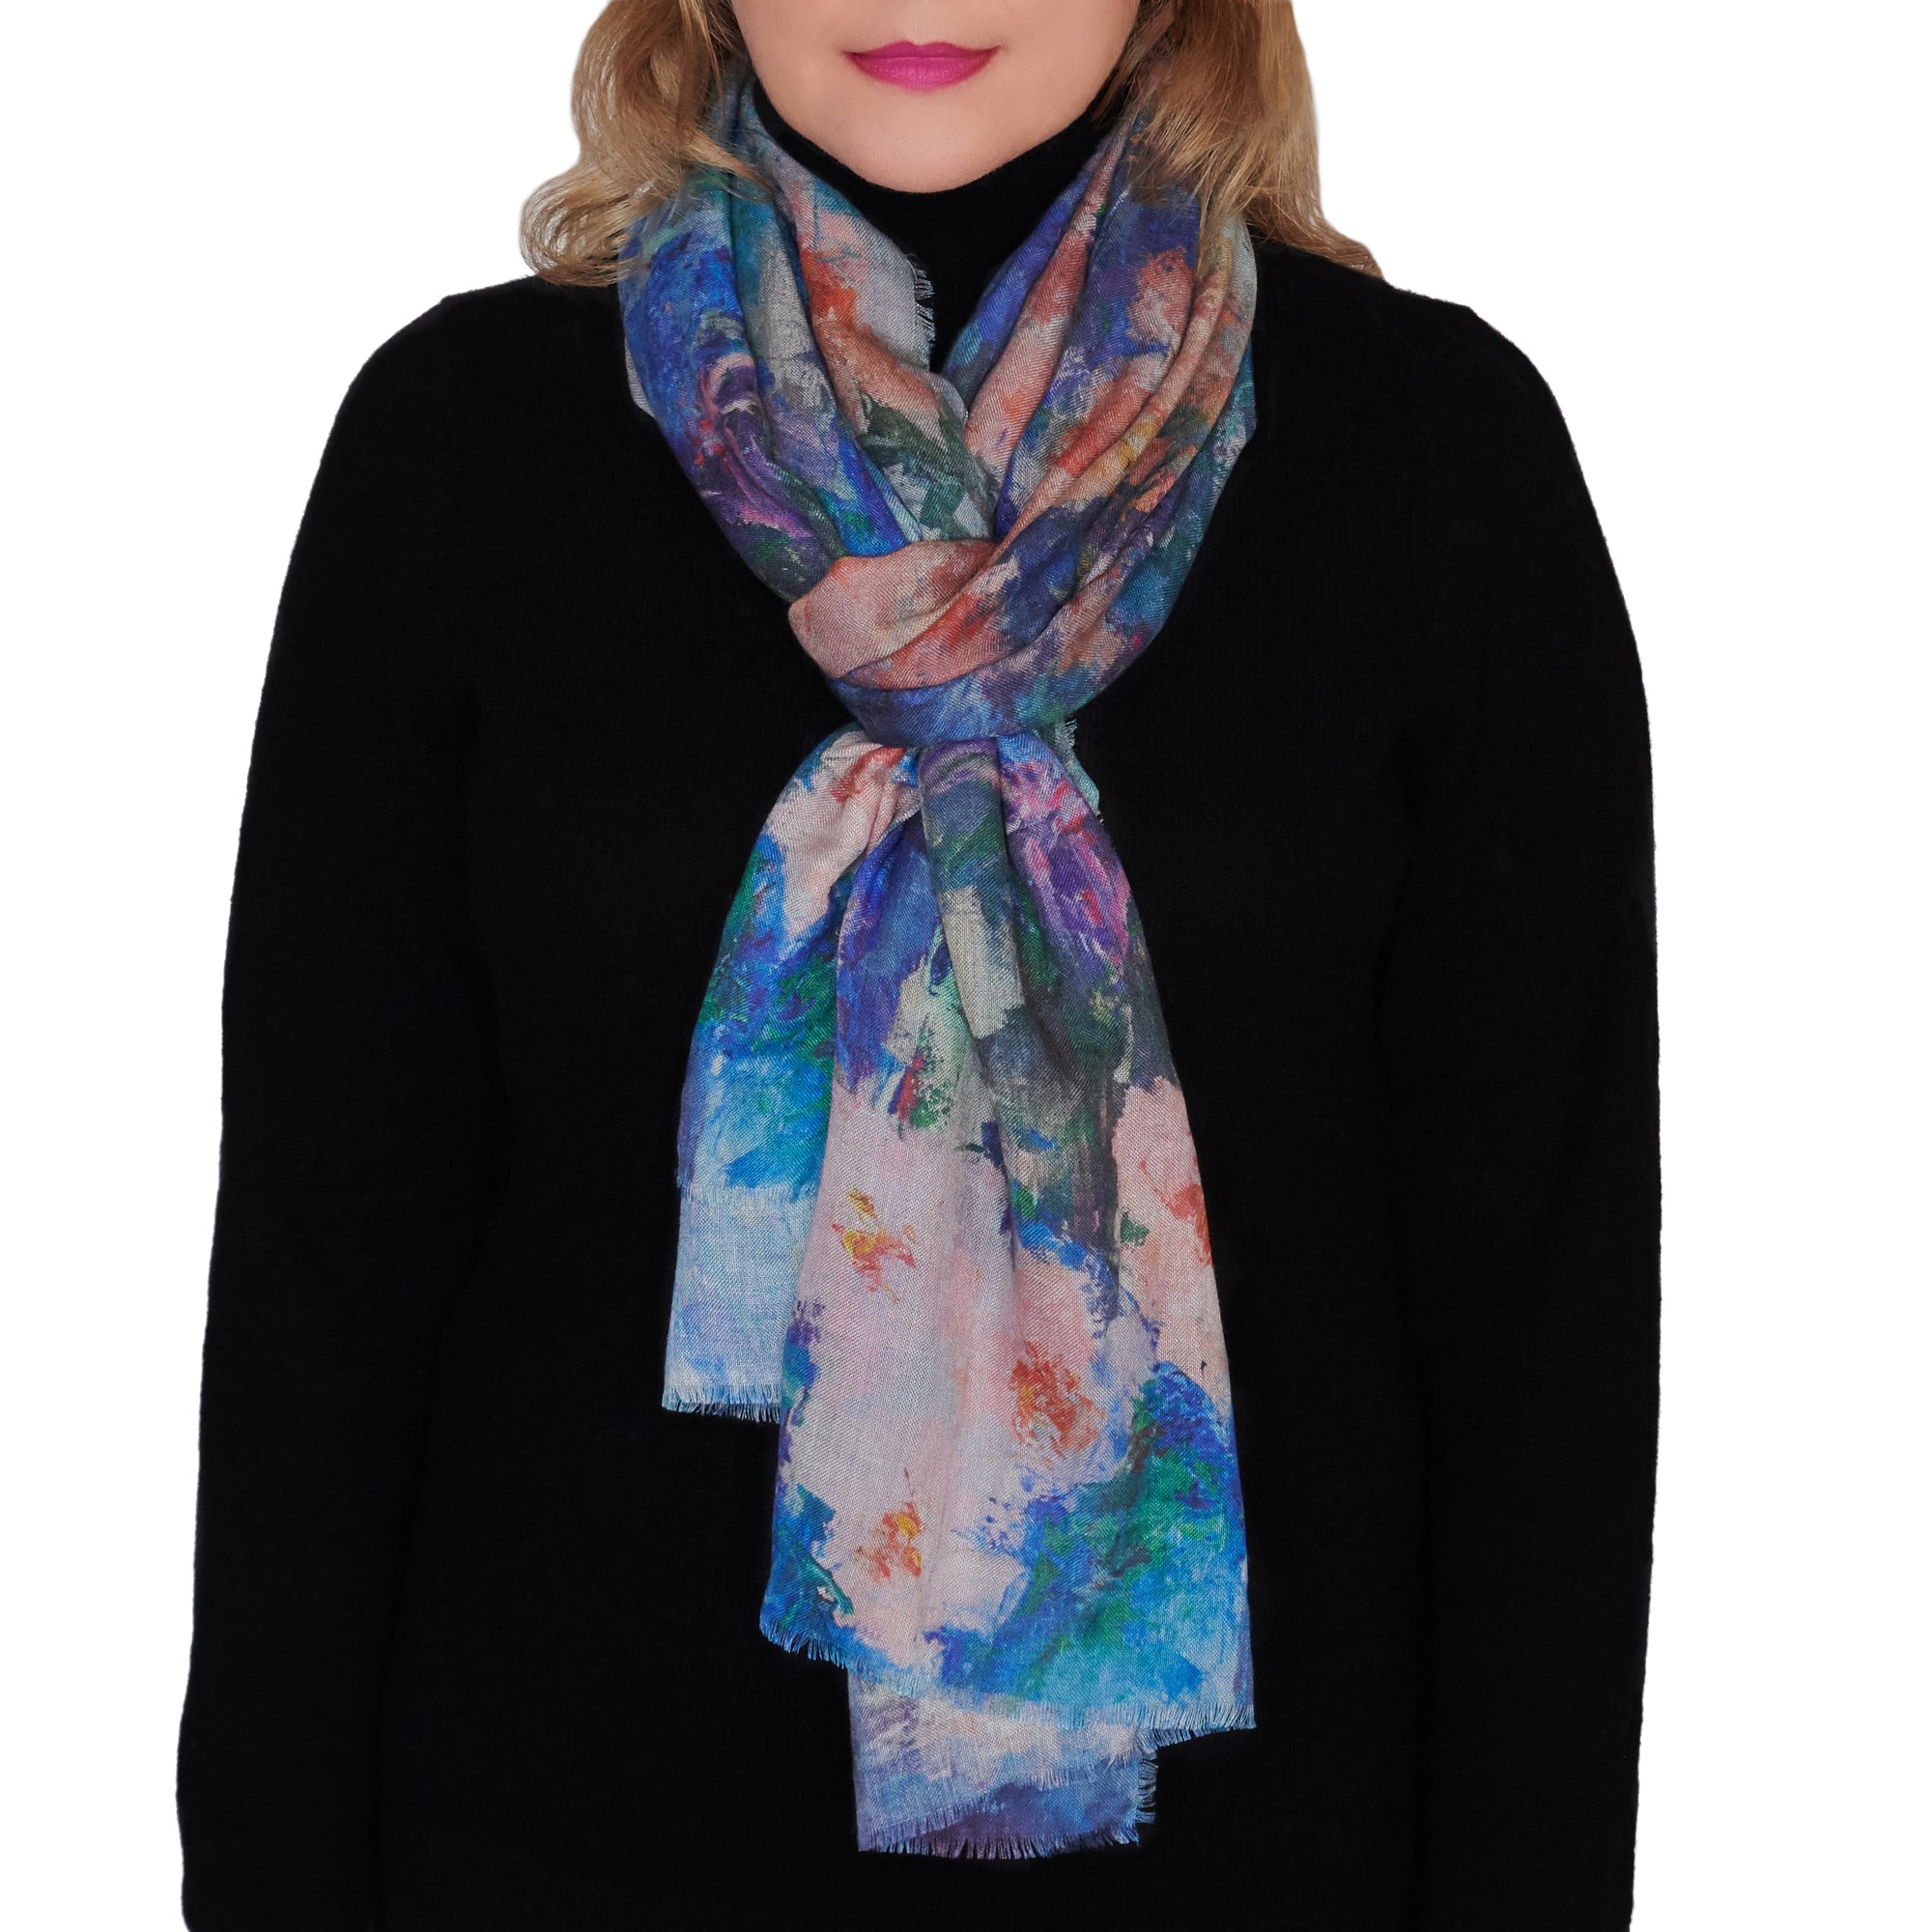 Long cashmere-silk scarf with floral design by Oksana Fine Art and Design, based on an original impressionist painting of pink orchids with a light green and blue background, worn over a black sweater, 210x70 cm, 82x27 inches